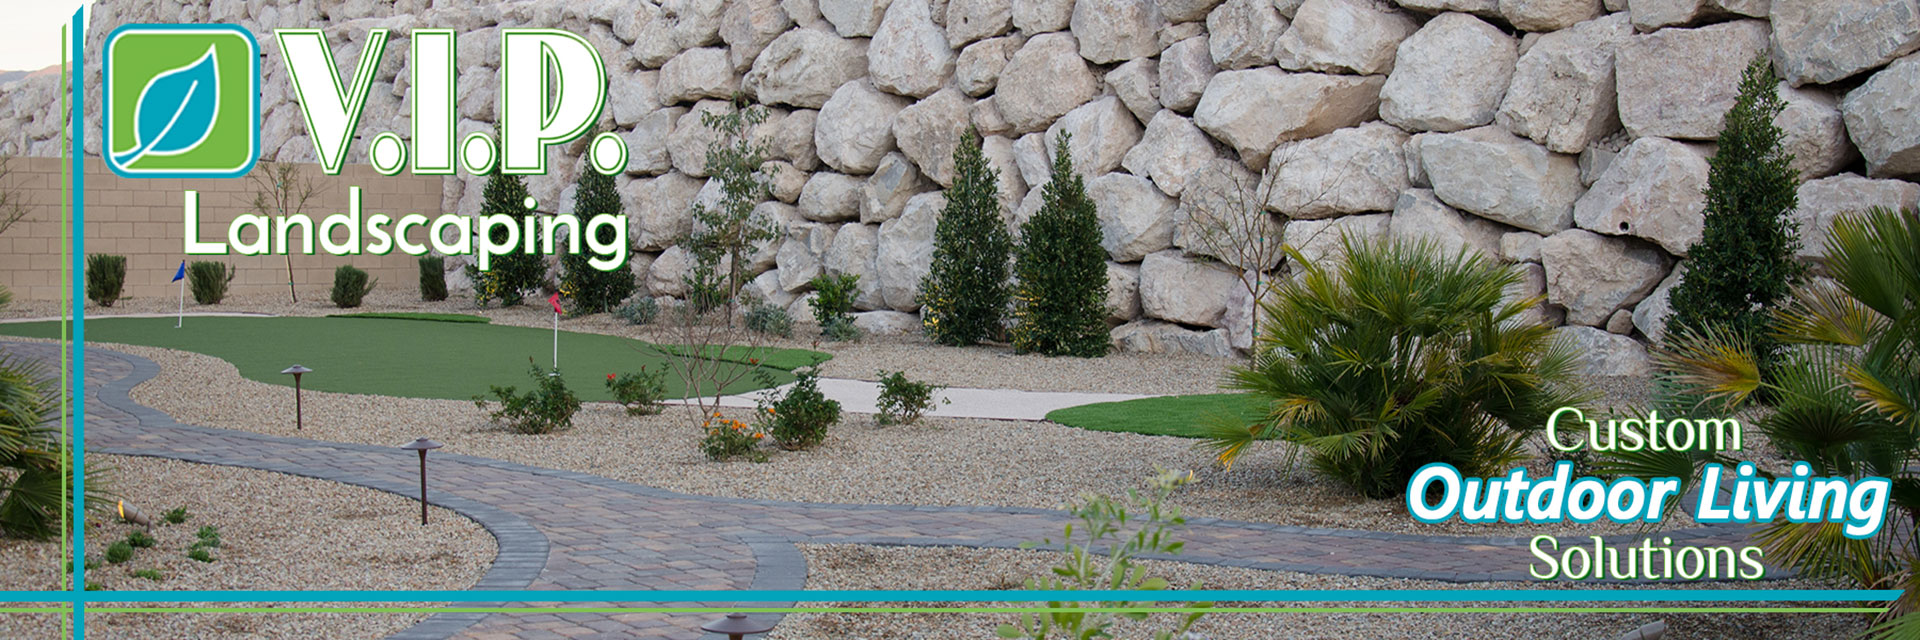 Putting green with boulder rock wall and pavers pathways combined with desert landscaping